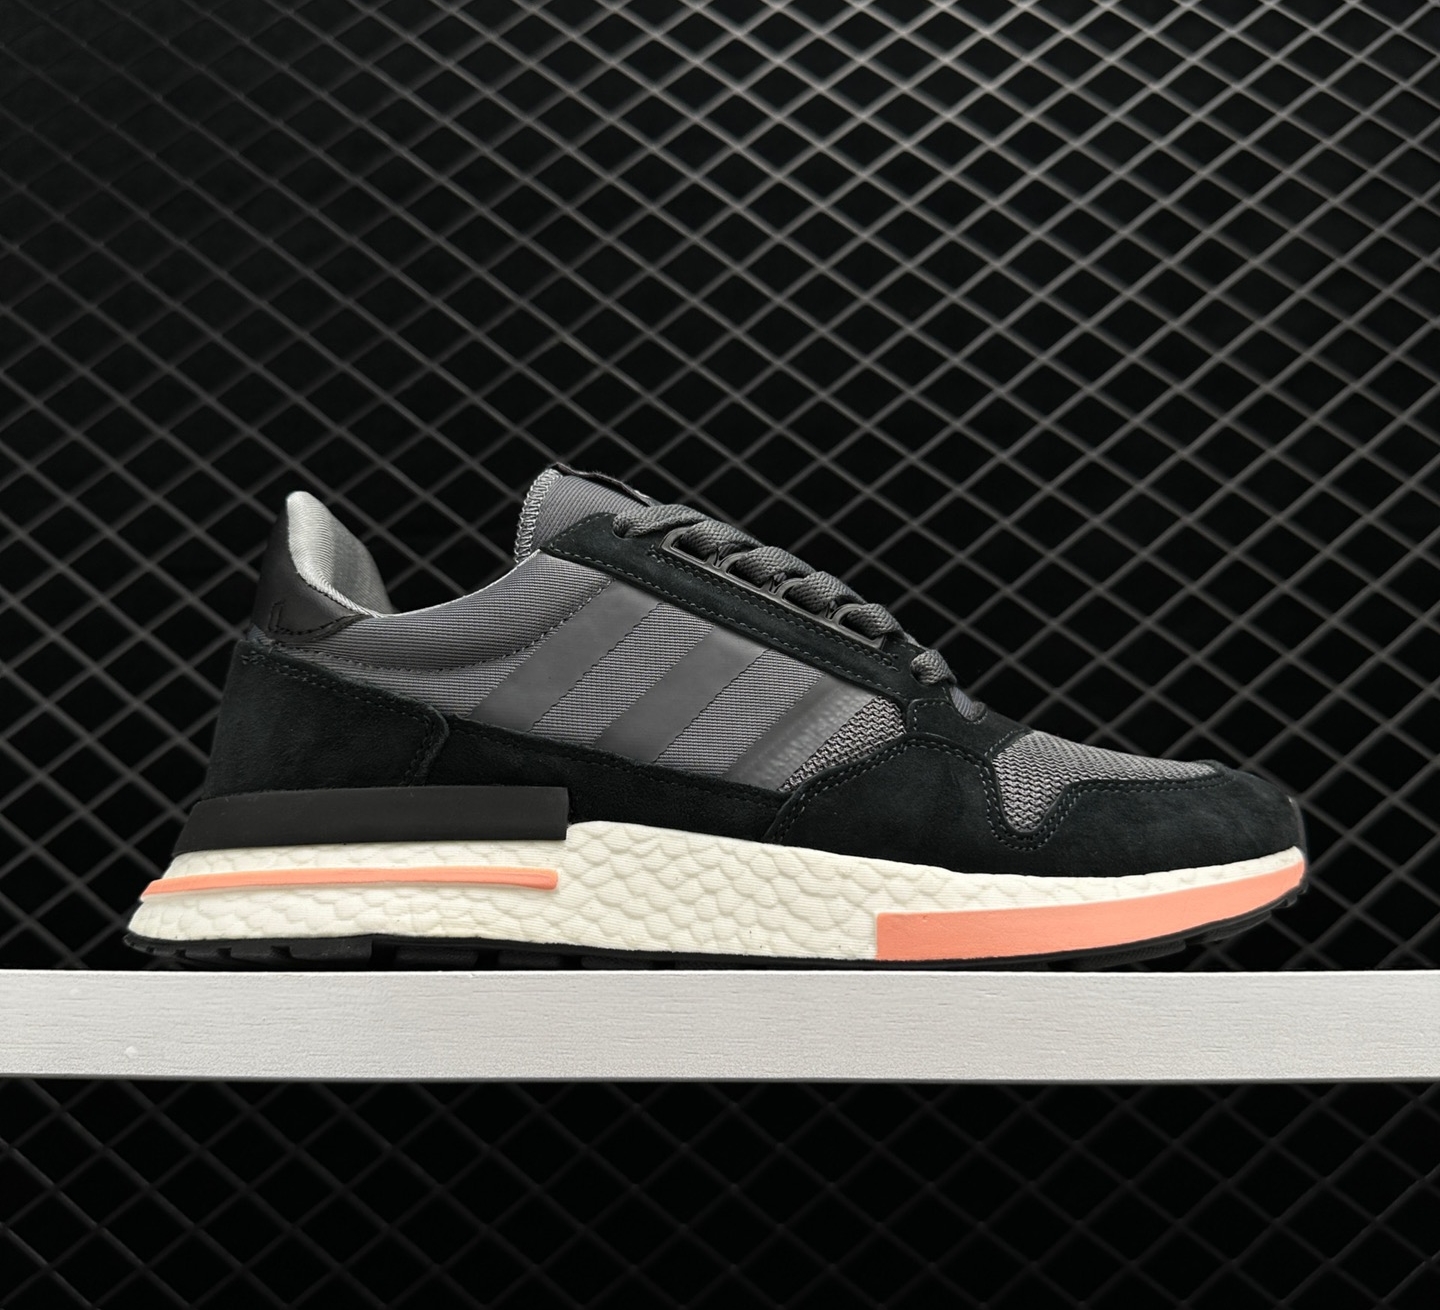 Adidas ZX 500 RM Gray White Pink B42217: Stylish and Comfortable Sneakers